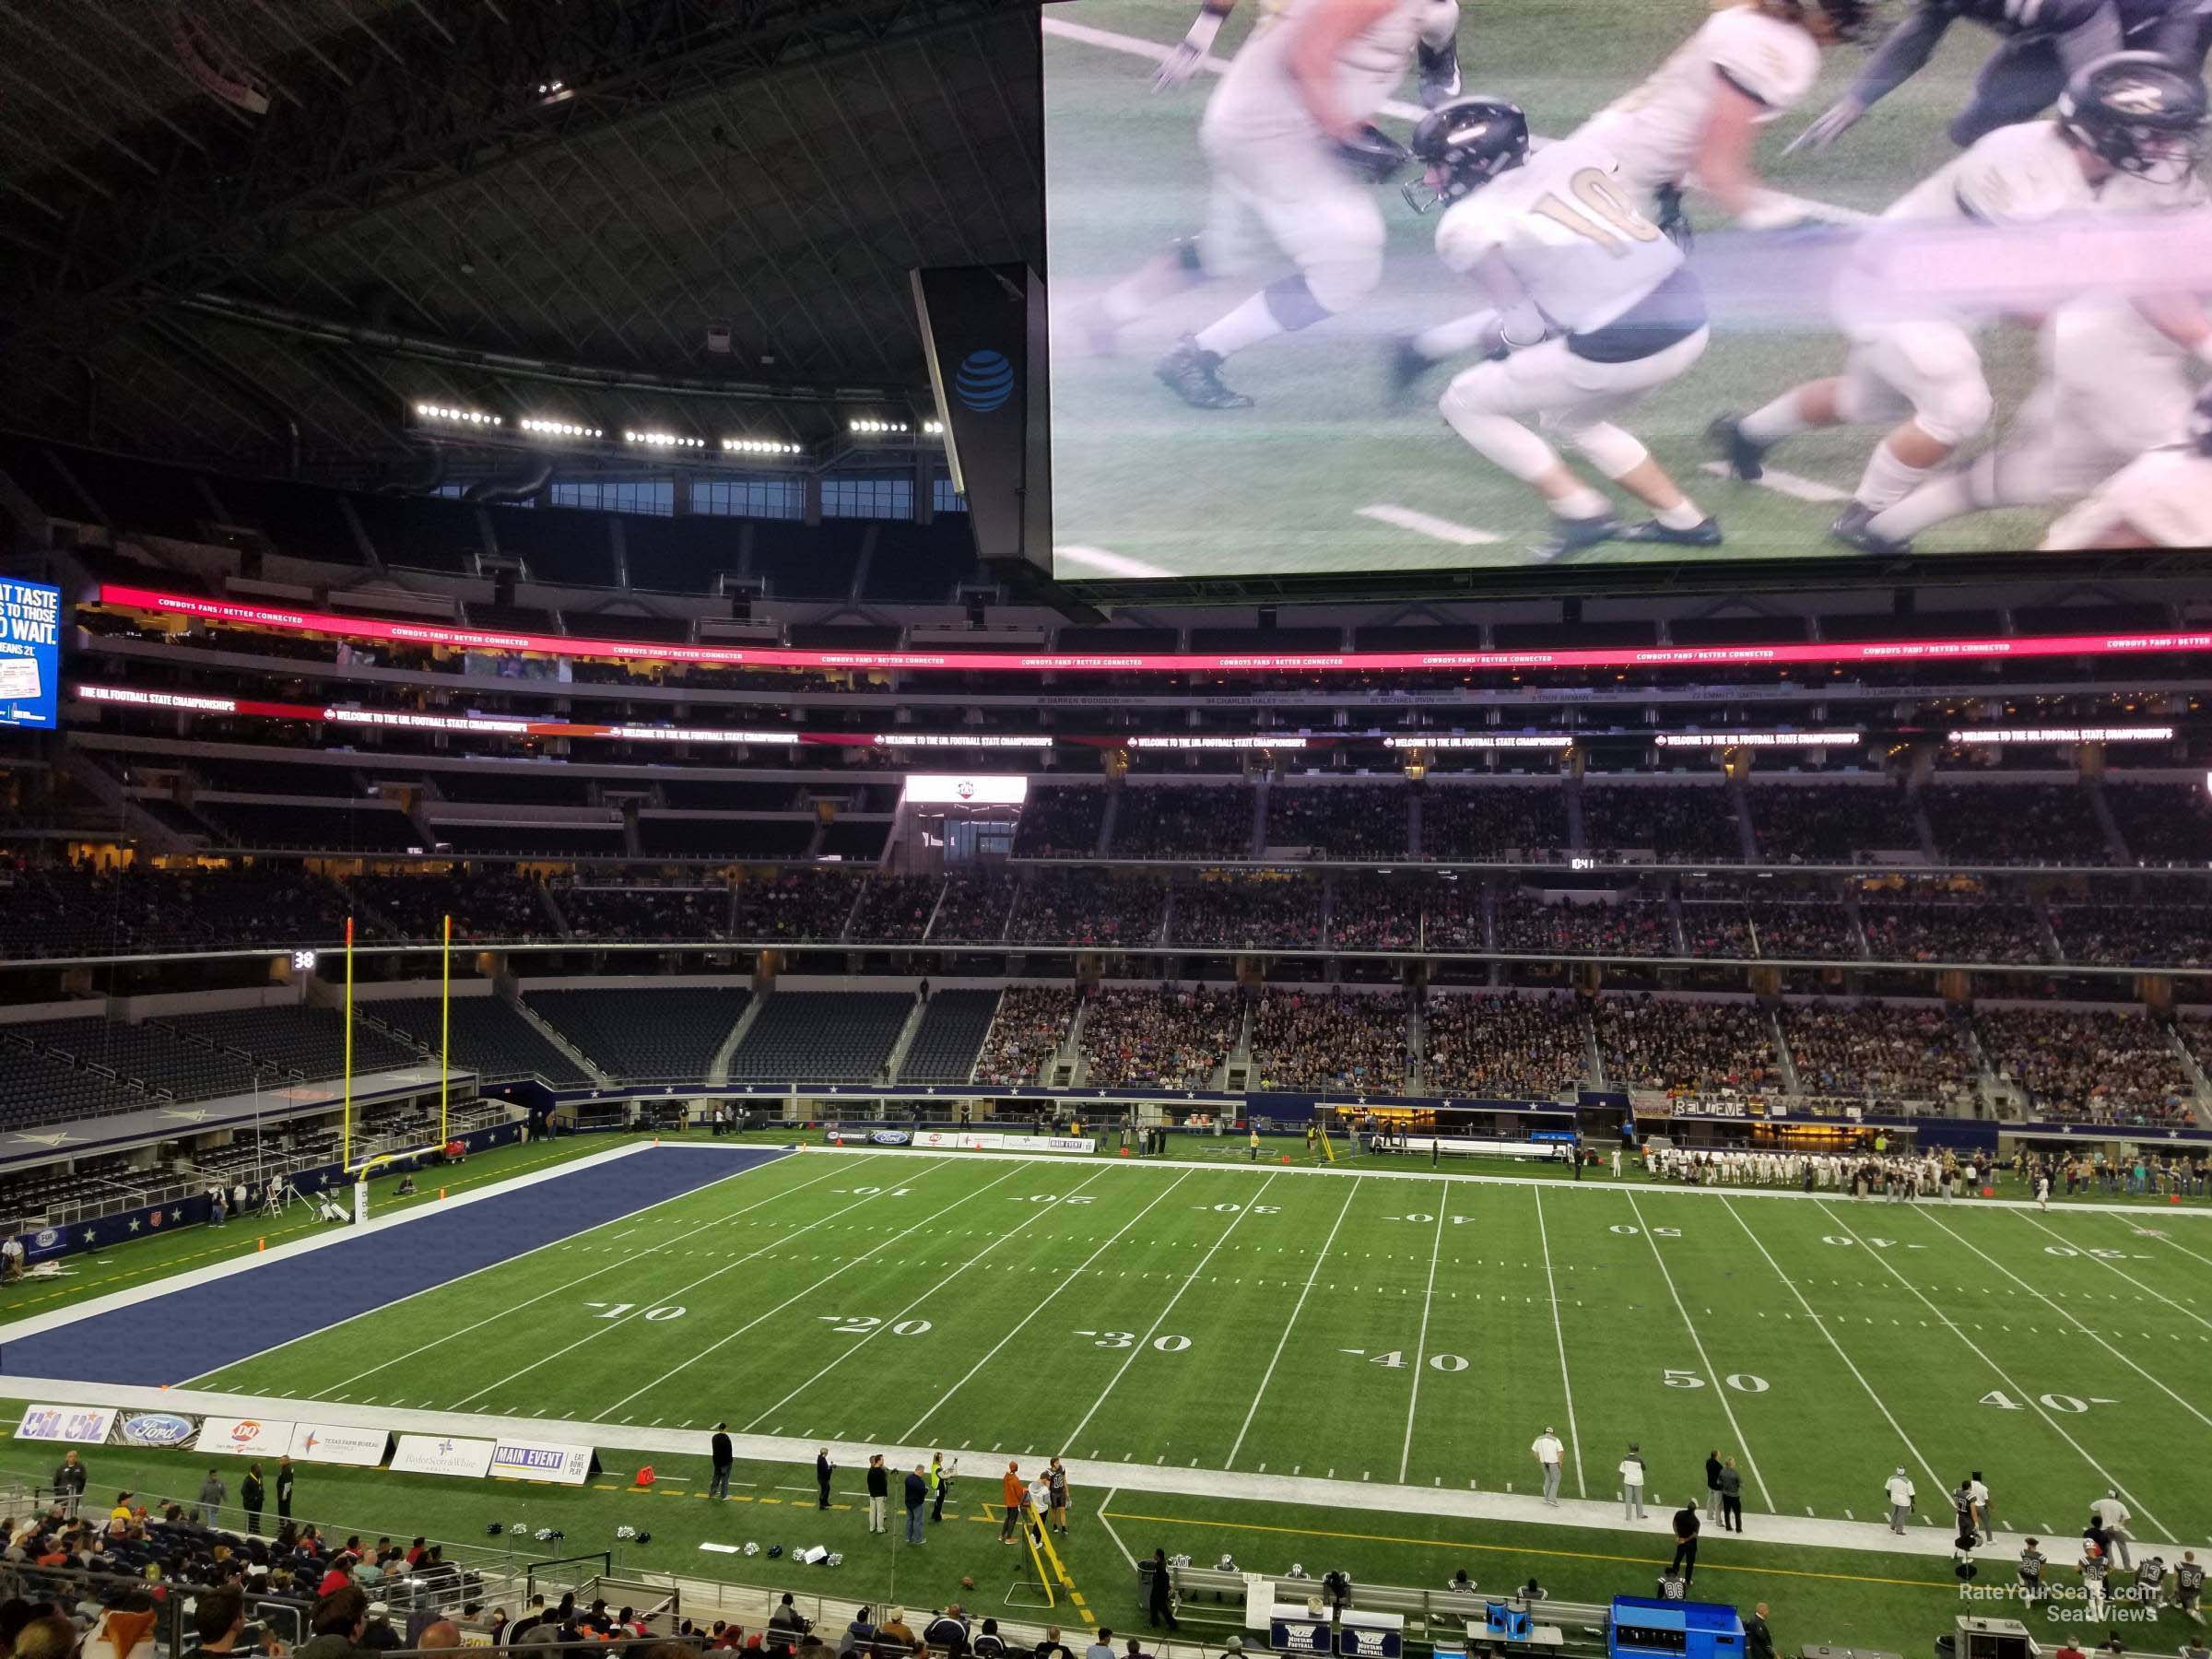 section c210, row 10 seat view  for football - at&t stadium (cowboys stadium)